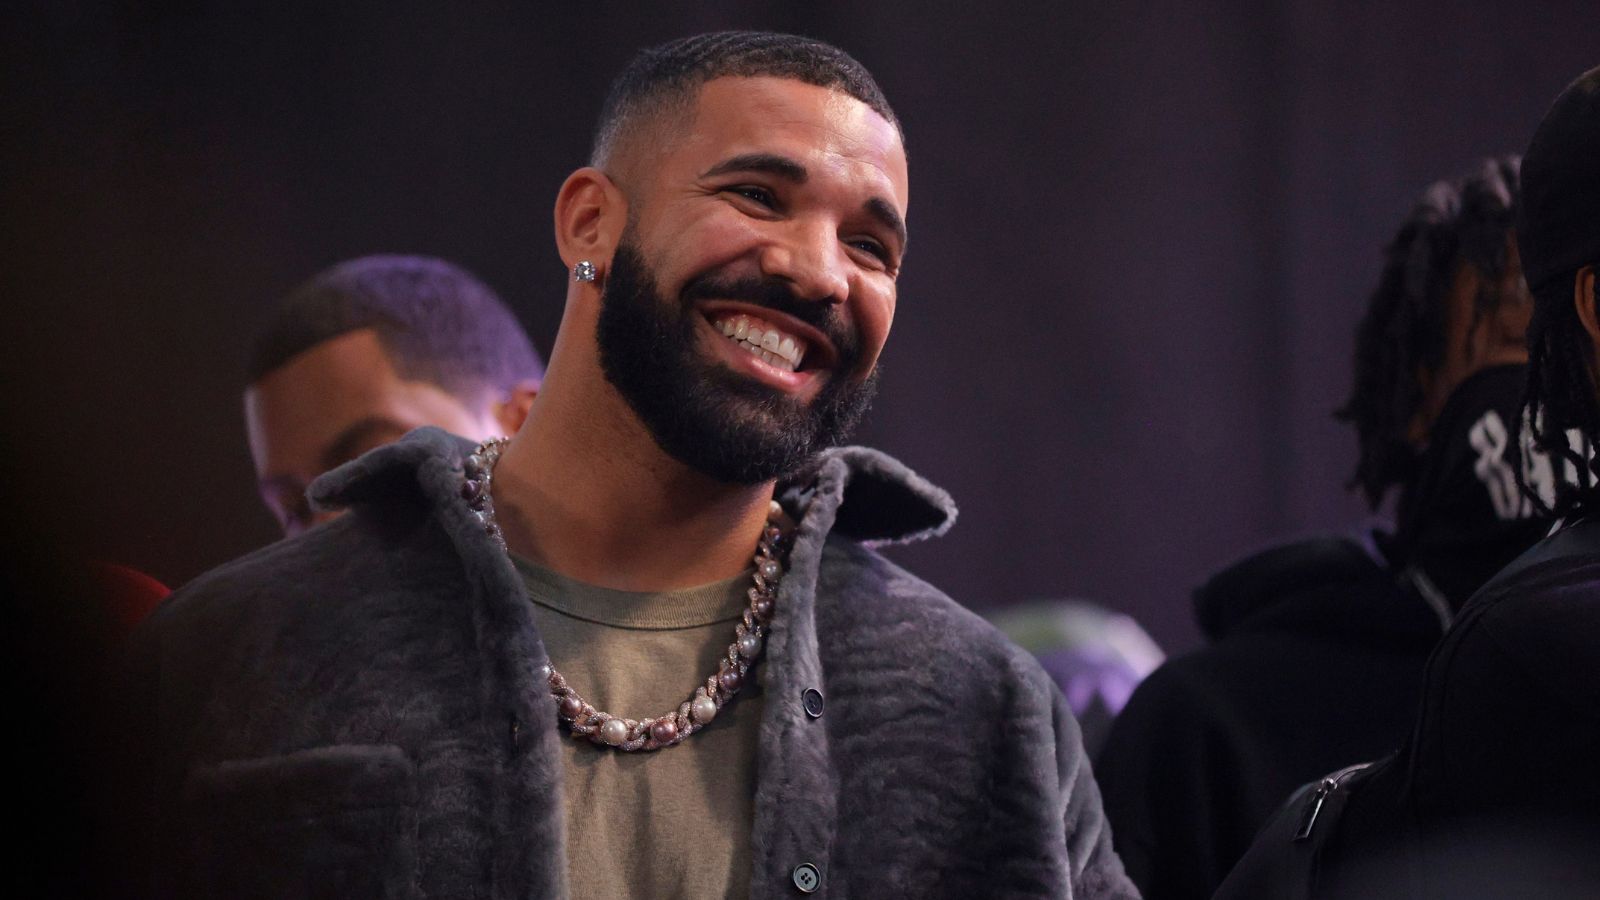 Drake reaches unhinged level of promotion, posts NSFW anime on Instagram